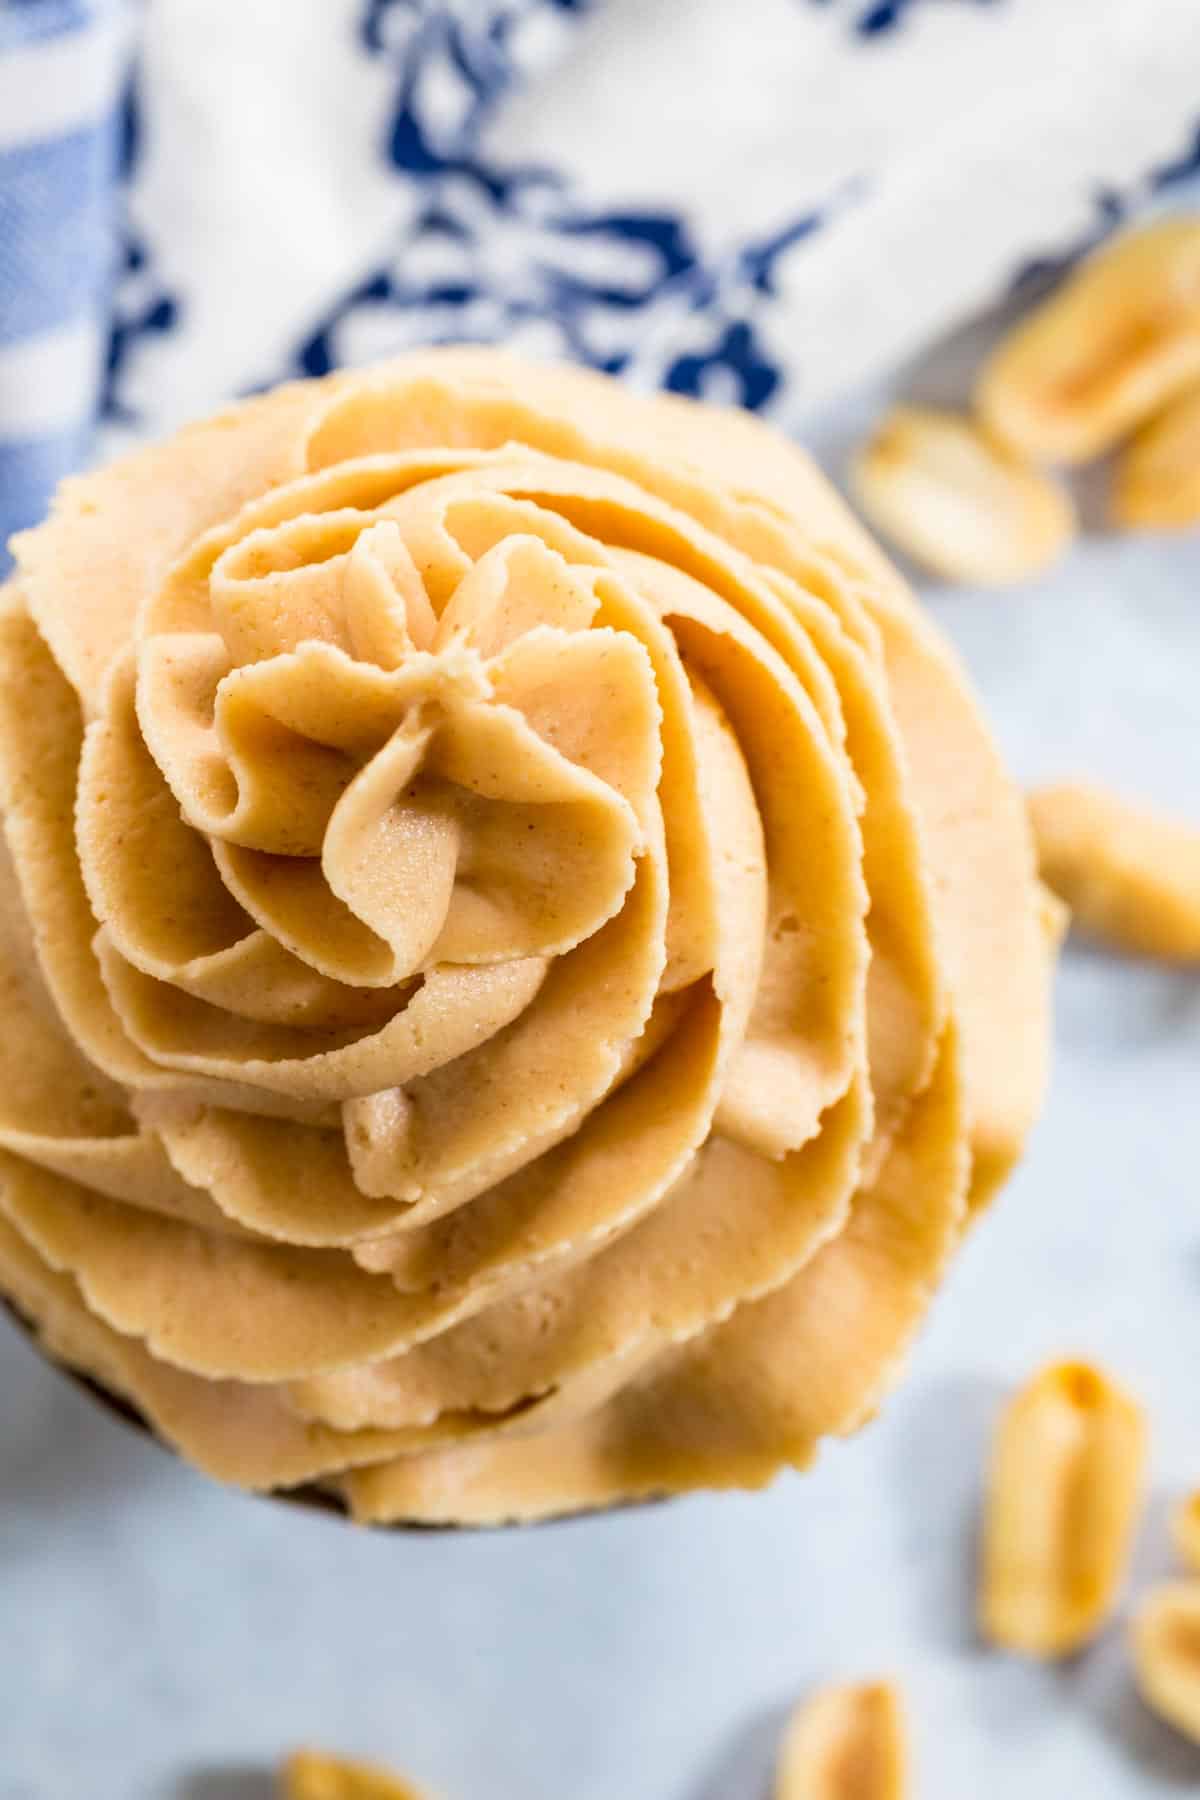 Swirls of peanut butter frosting are shown.